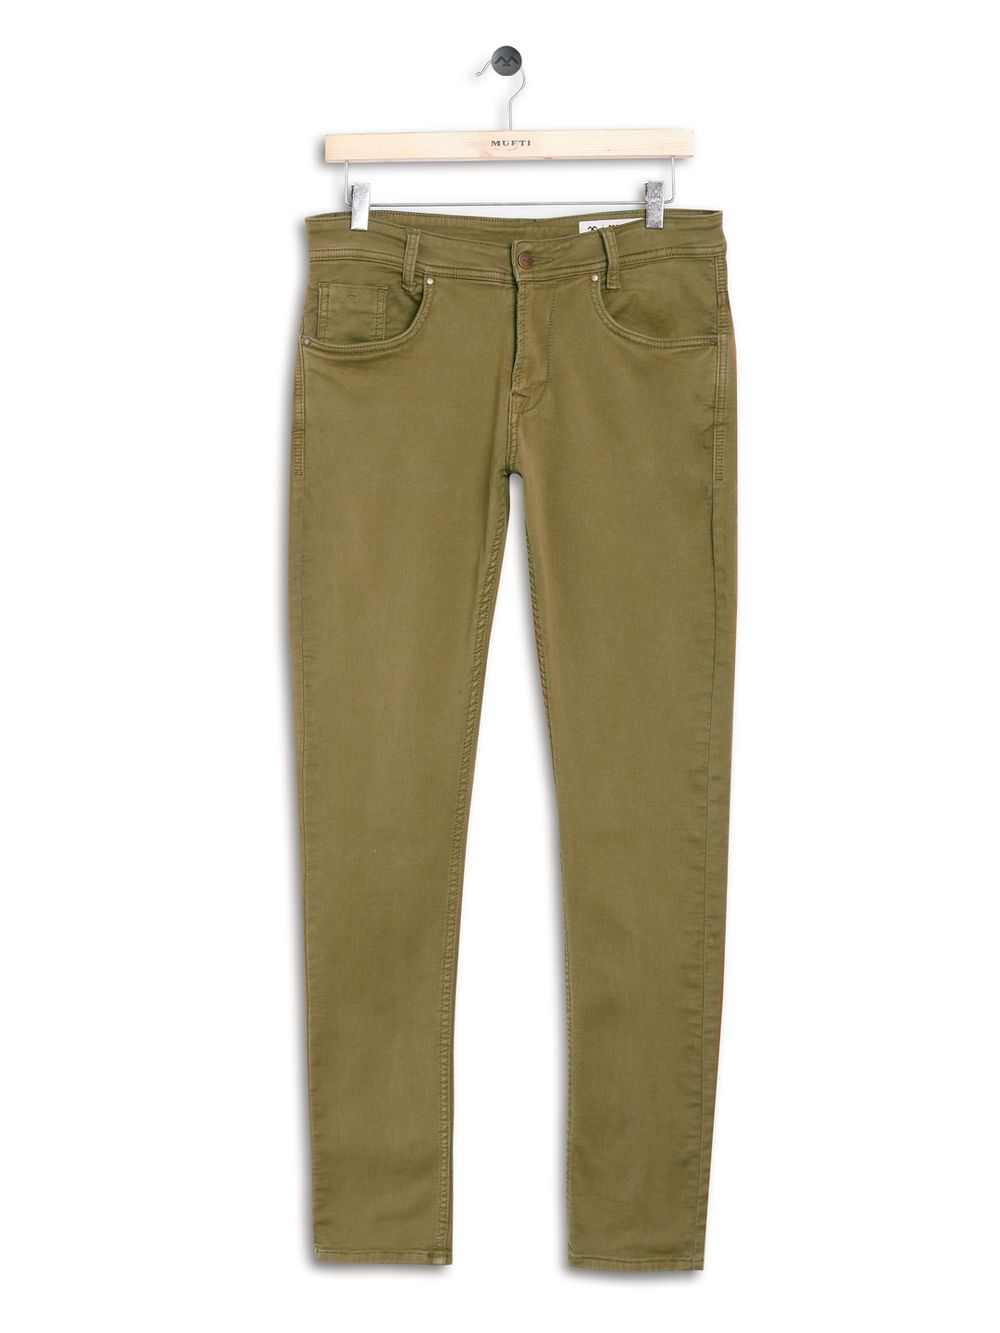 Khaki Skinny Fit Knitted Stretch Jeans